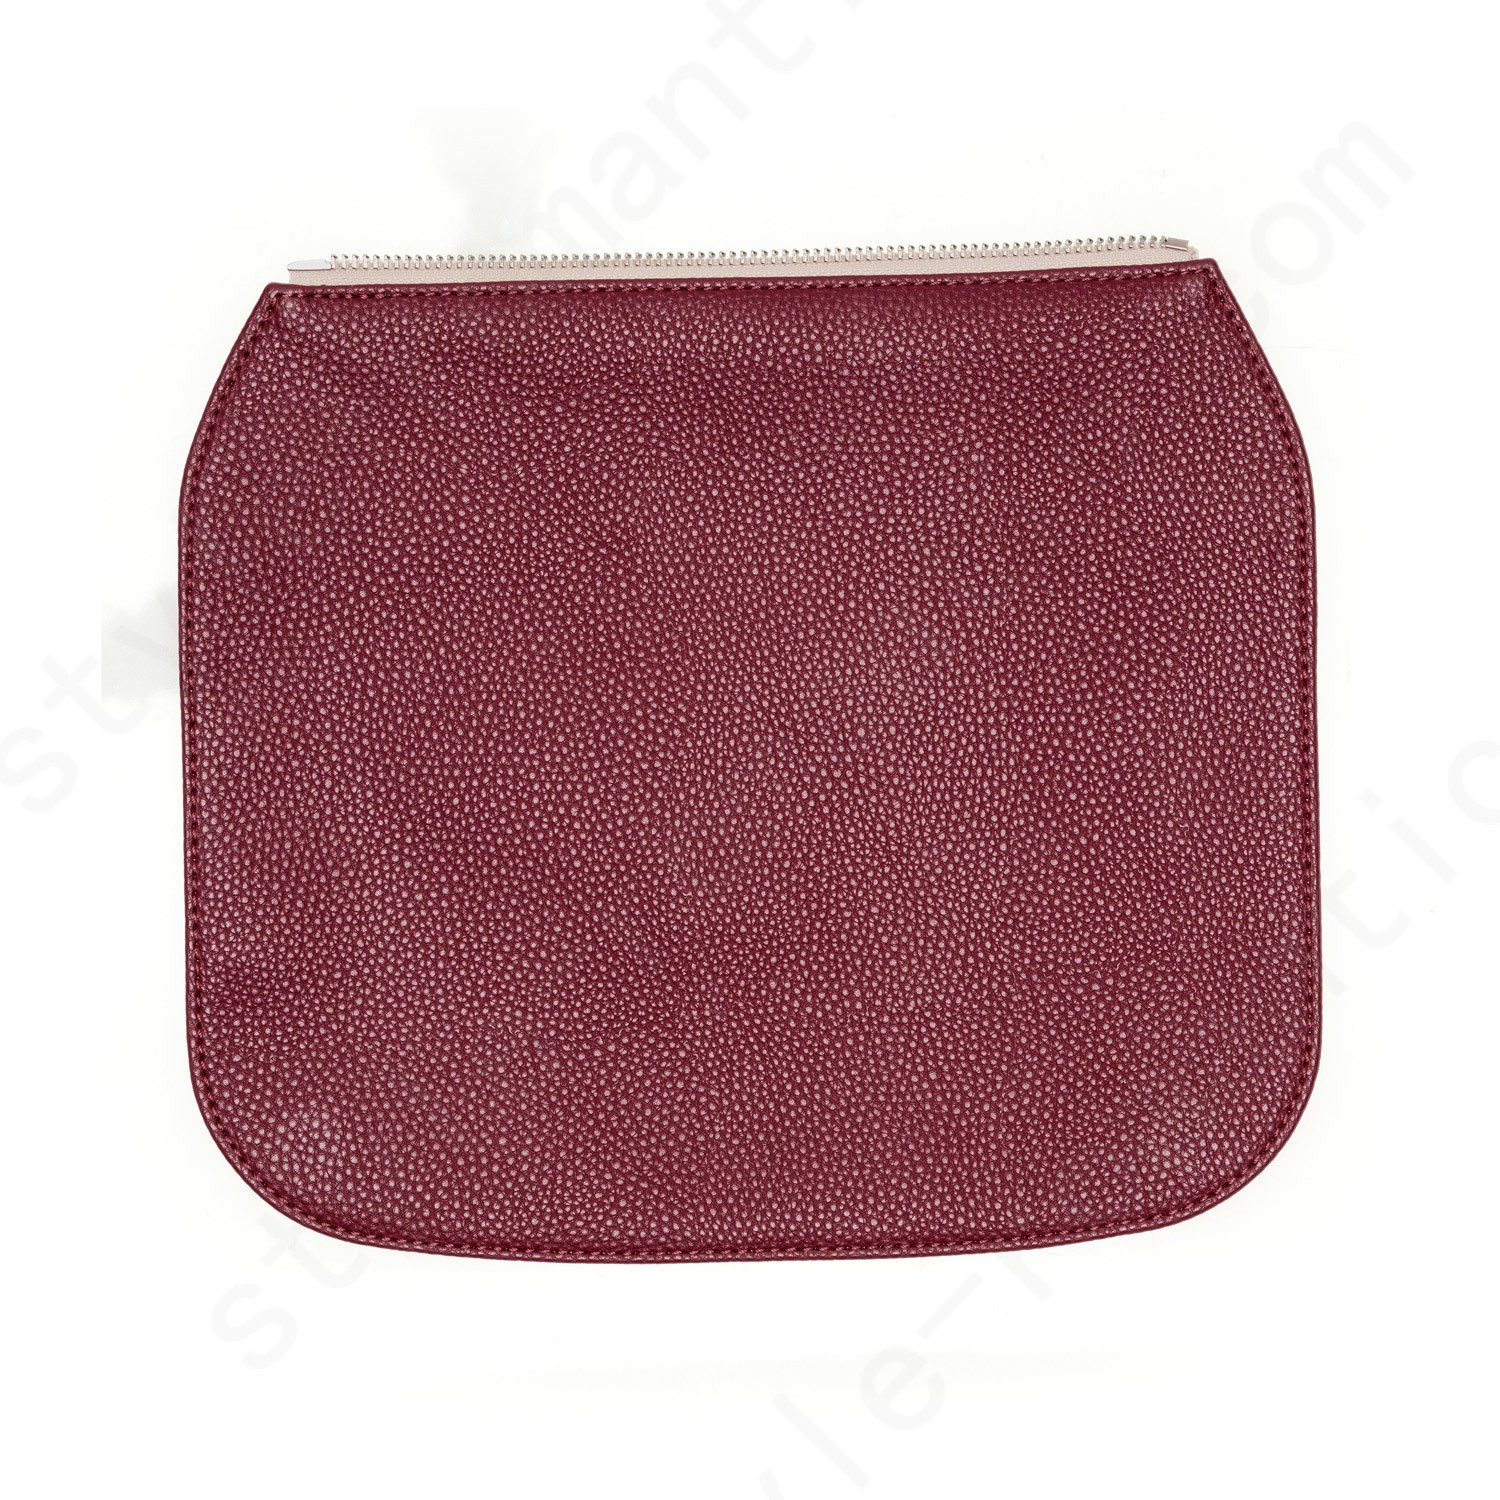 Thirty-One Gifts Studio Thirty-One Flap - Deep Merlot Pebble Handbags Accessories - Thirty-One Gifts Studio Thirty-One Flap - Deep Merlot Pebble Handbags Accessories